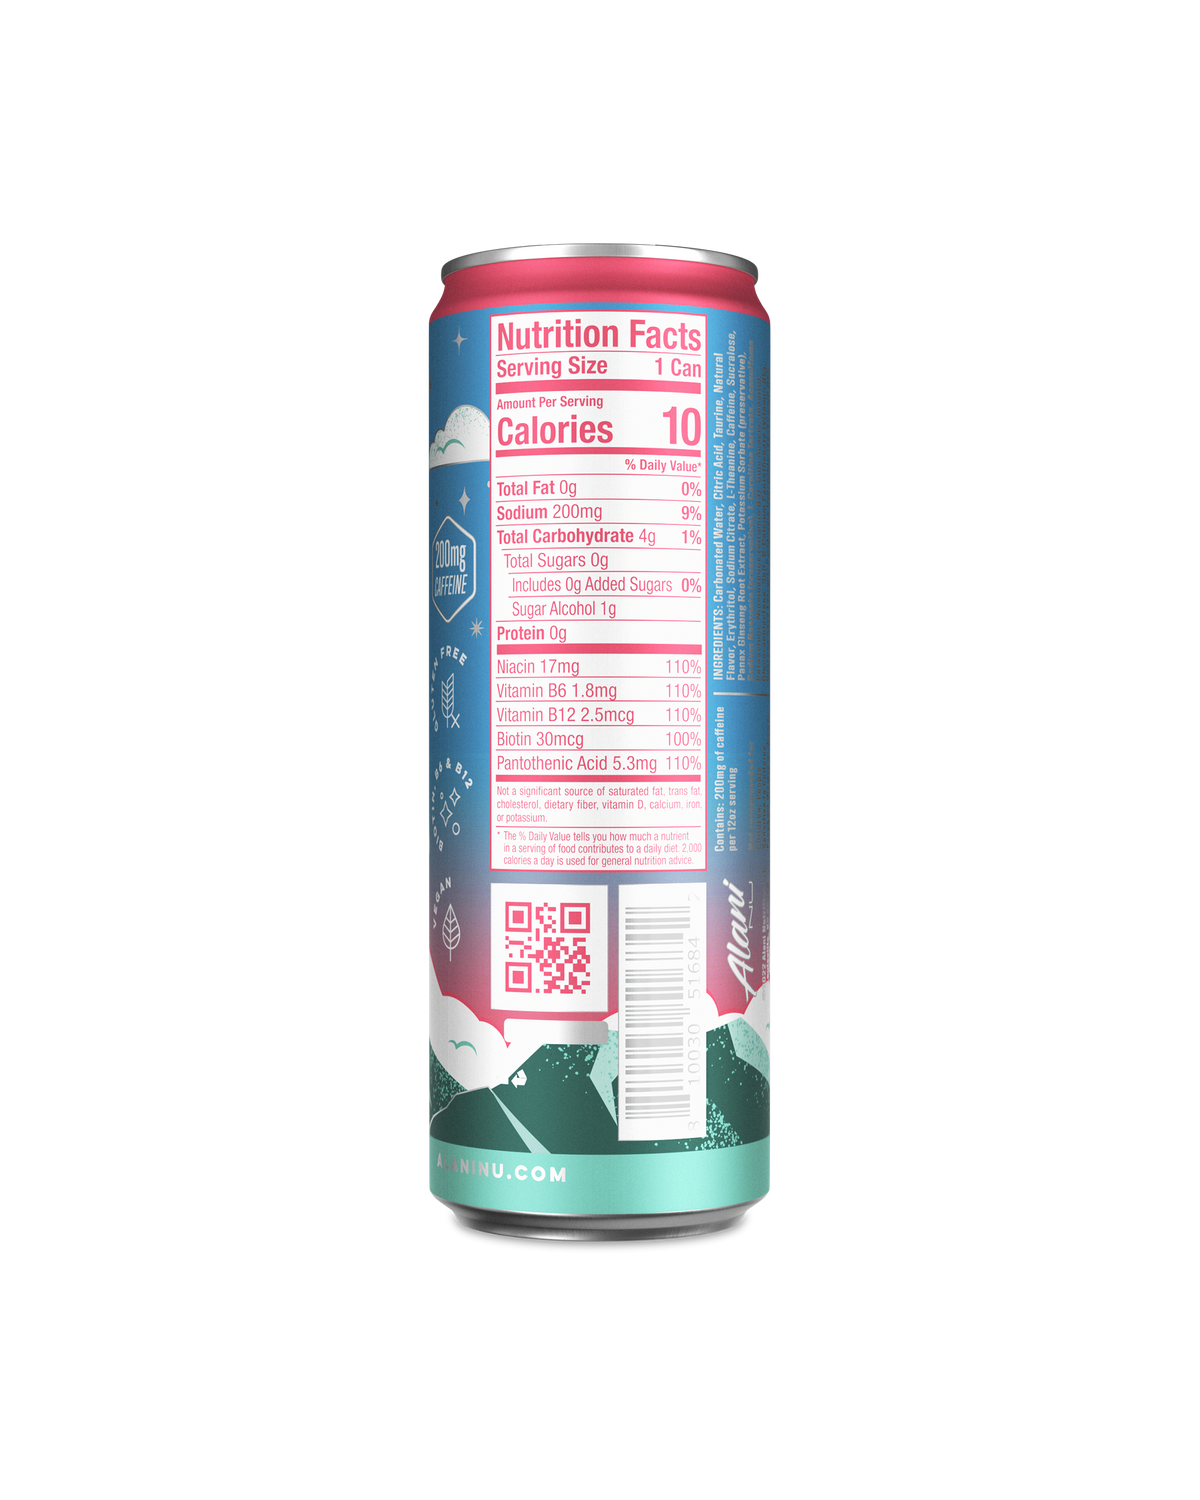 A back view of Energy Drink in Kiwi Guava flavor highlighting nutrtion facts.